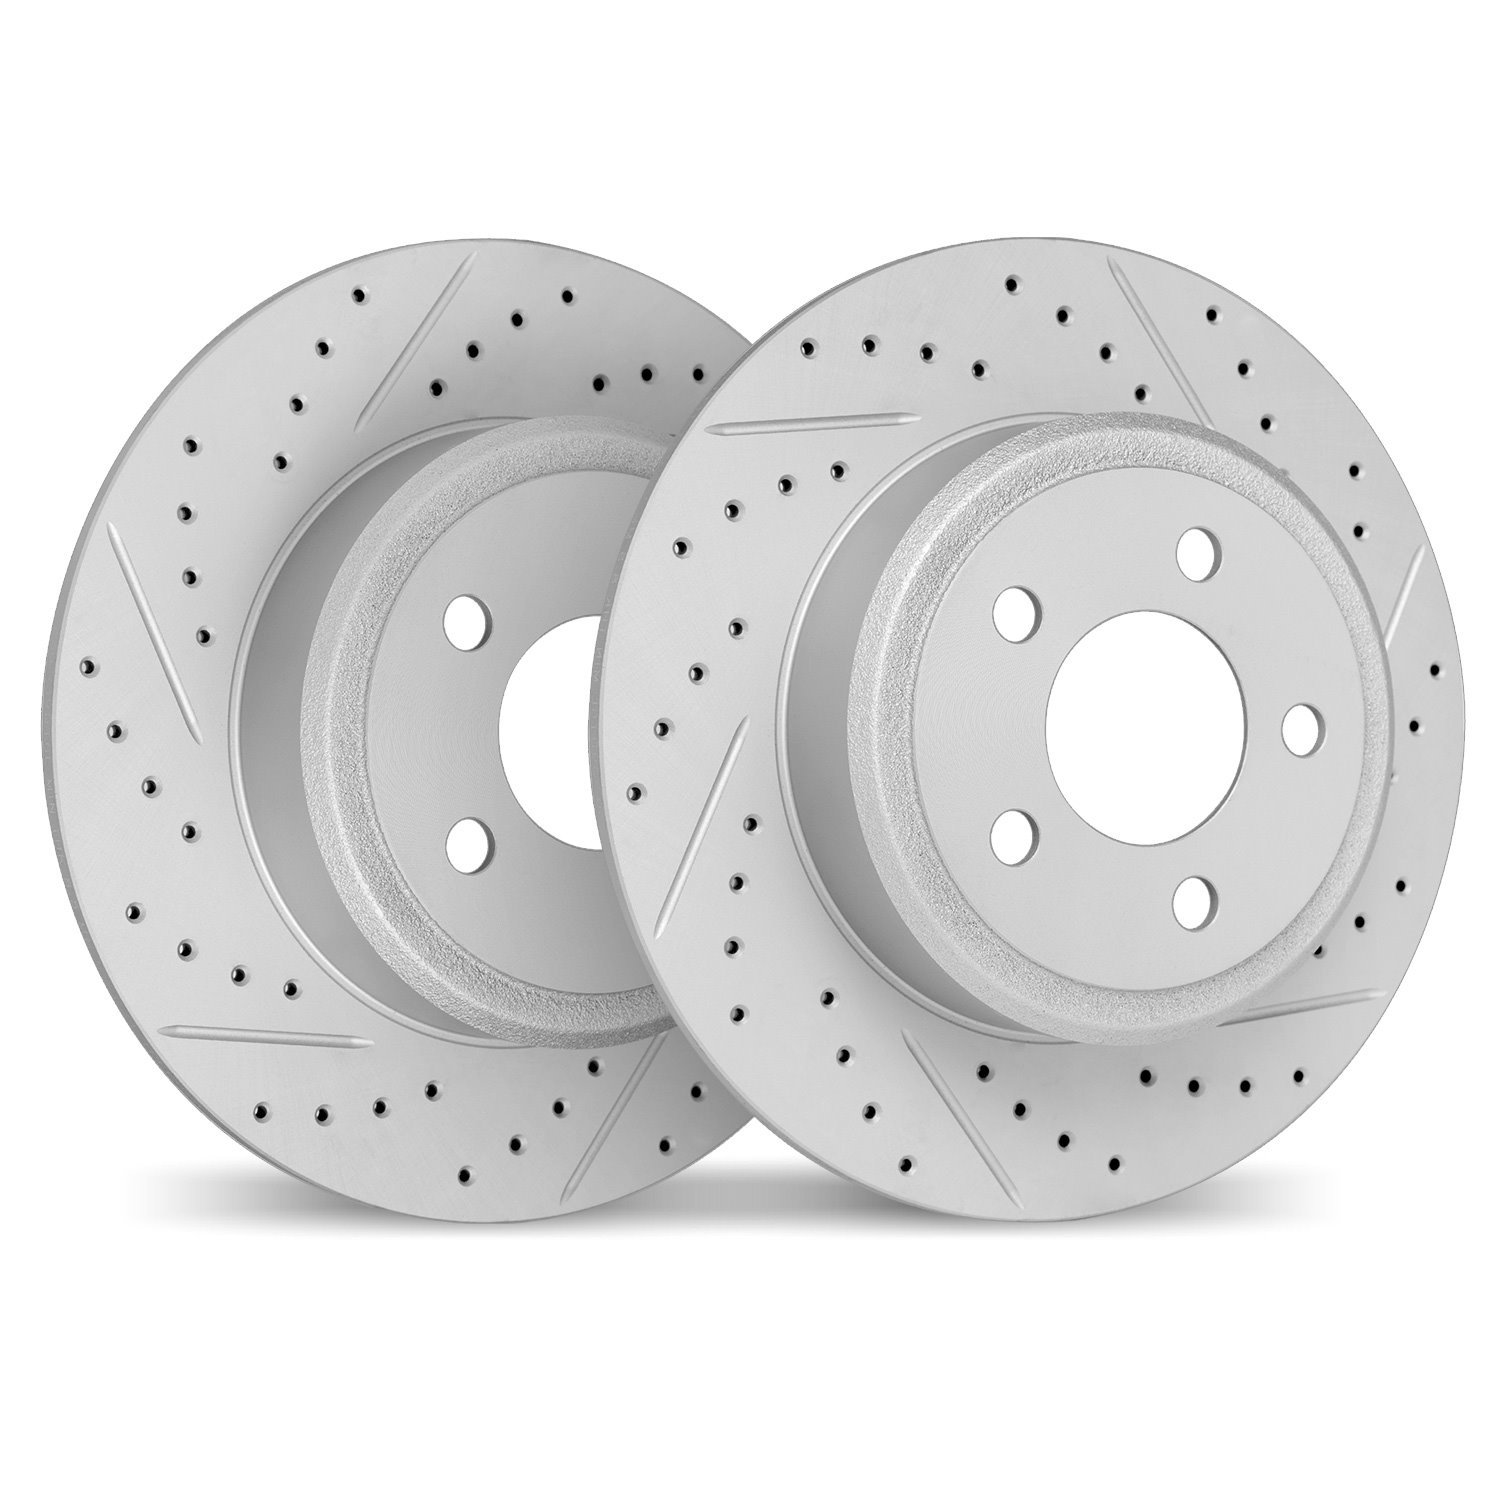 2002-47032 Geoperformance Drilled/Slotted Brake Rotors, Fits Select GM, Position: Rear